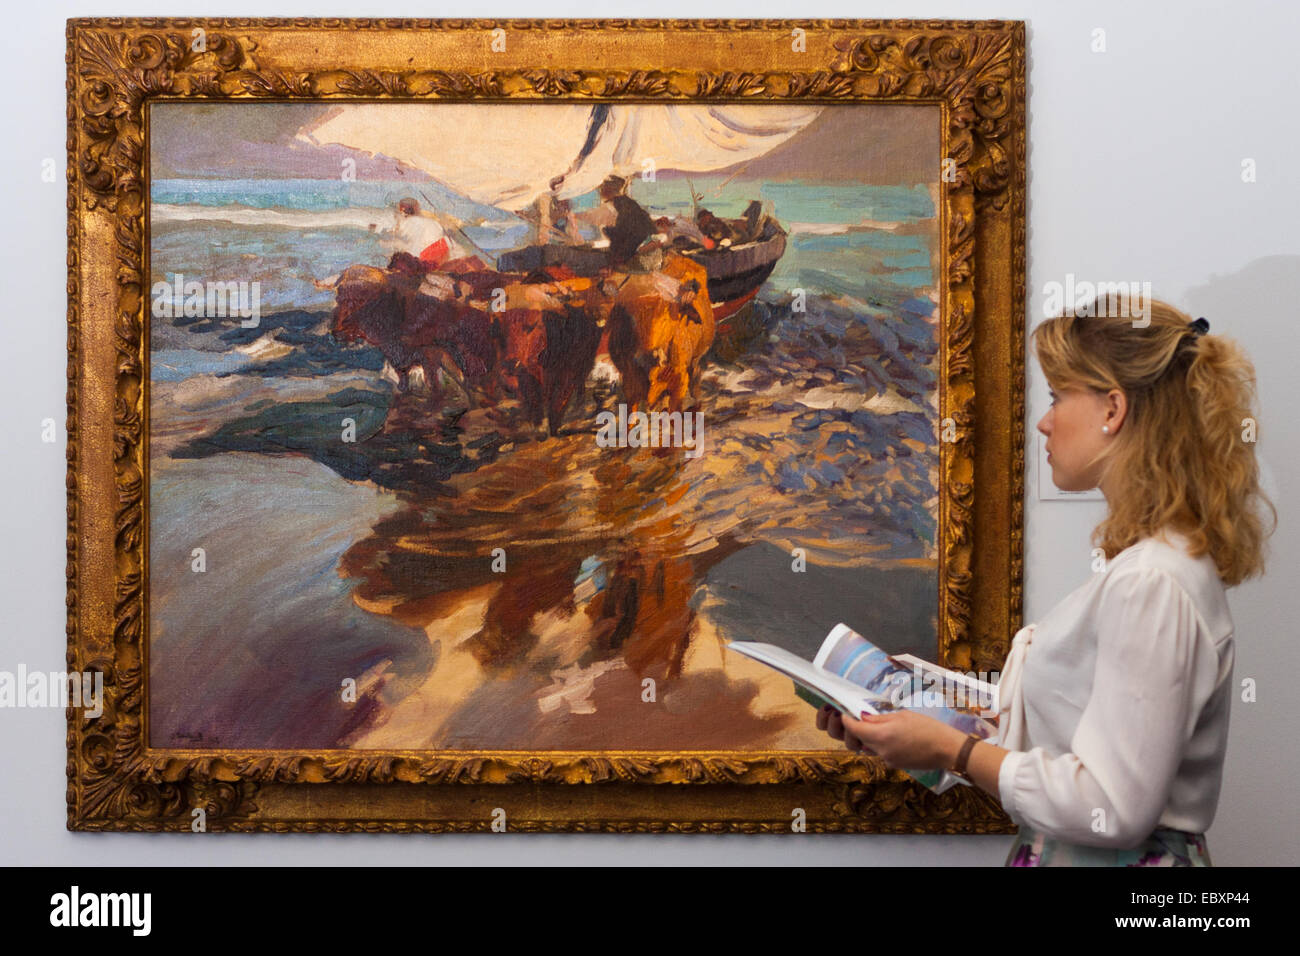 London, UK. 5th December, 2014. World renowned aution house Sotheby's is to offer a collection of British and Continental masters to be sold at auction on December 10th 2014. PICTURED: A woman admires the bold brushstrokes of Joaquin Sorolla's Vuelta de la Pesca, Playa Valencia (The return from fishing, Valencia beach) which is expected to fetch between £1,4 and 1.8million at auction. Credit:  Paul Davey/Alamy Live News Stock Photo